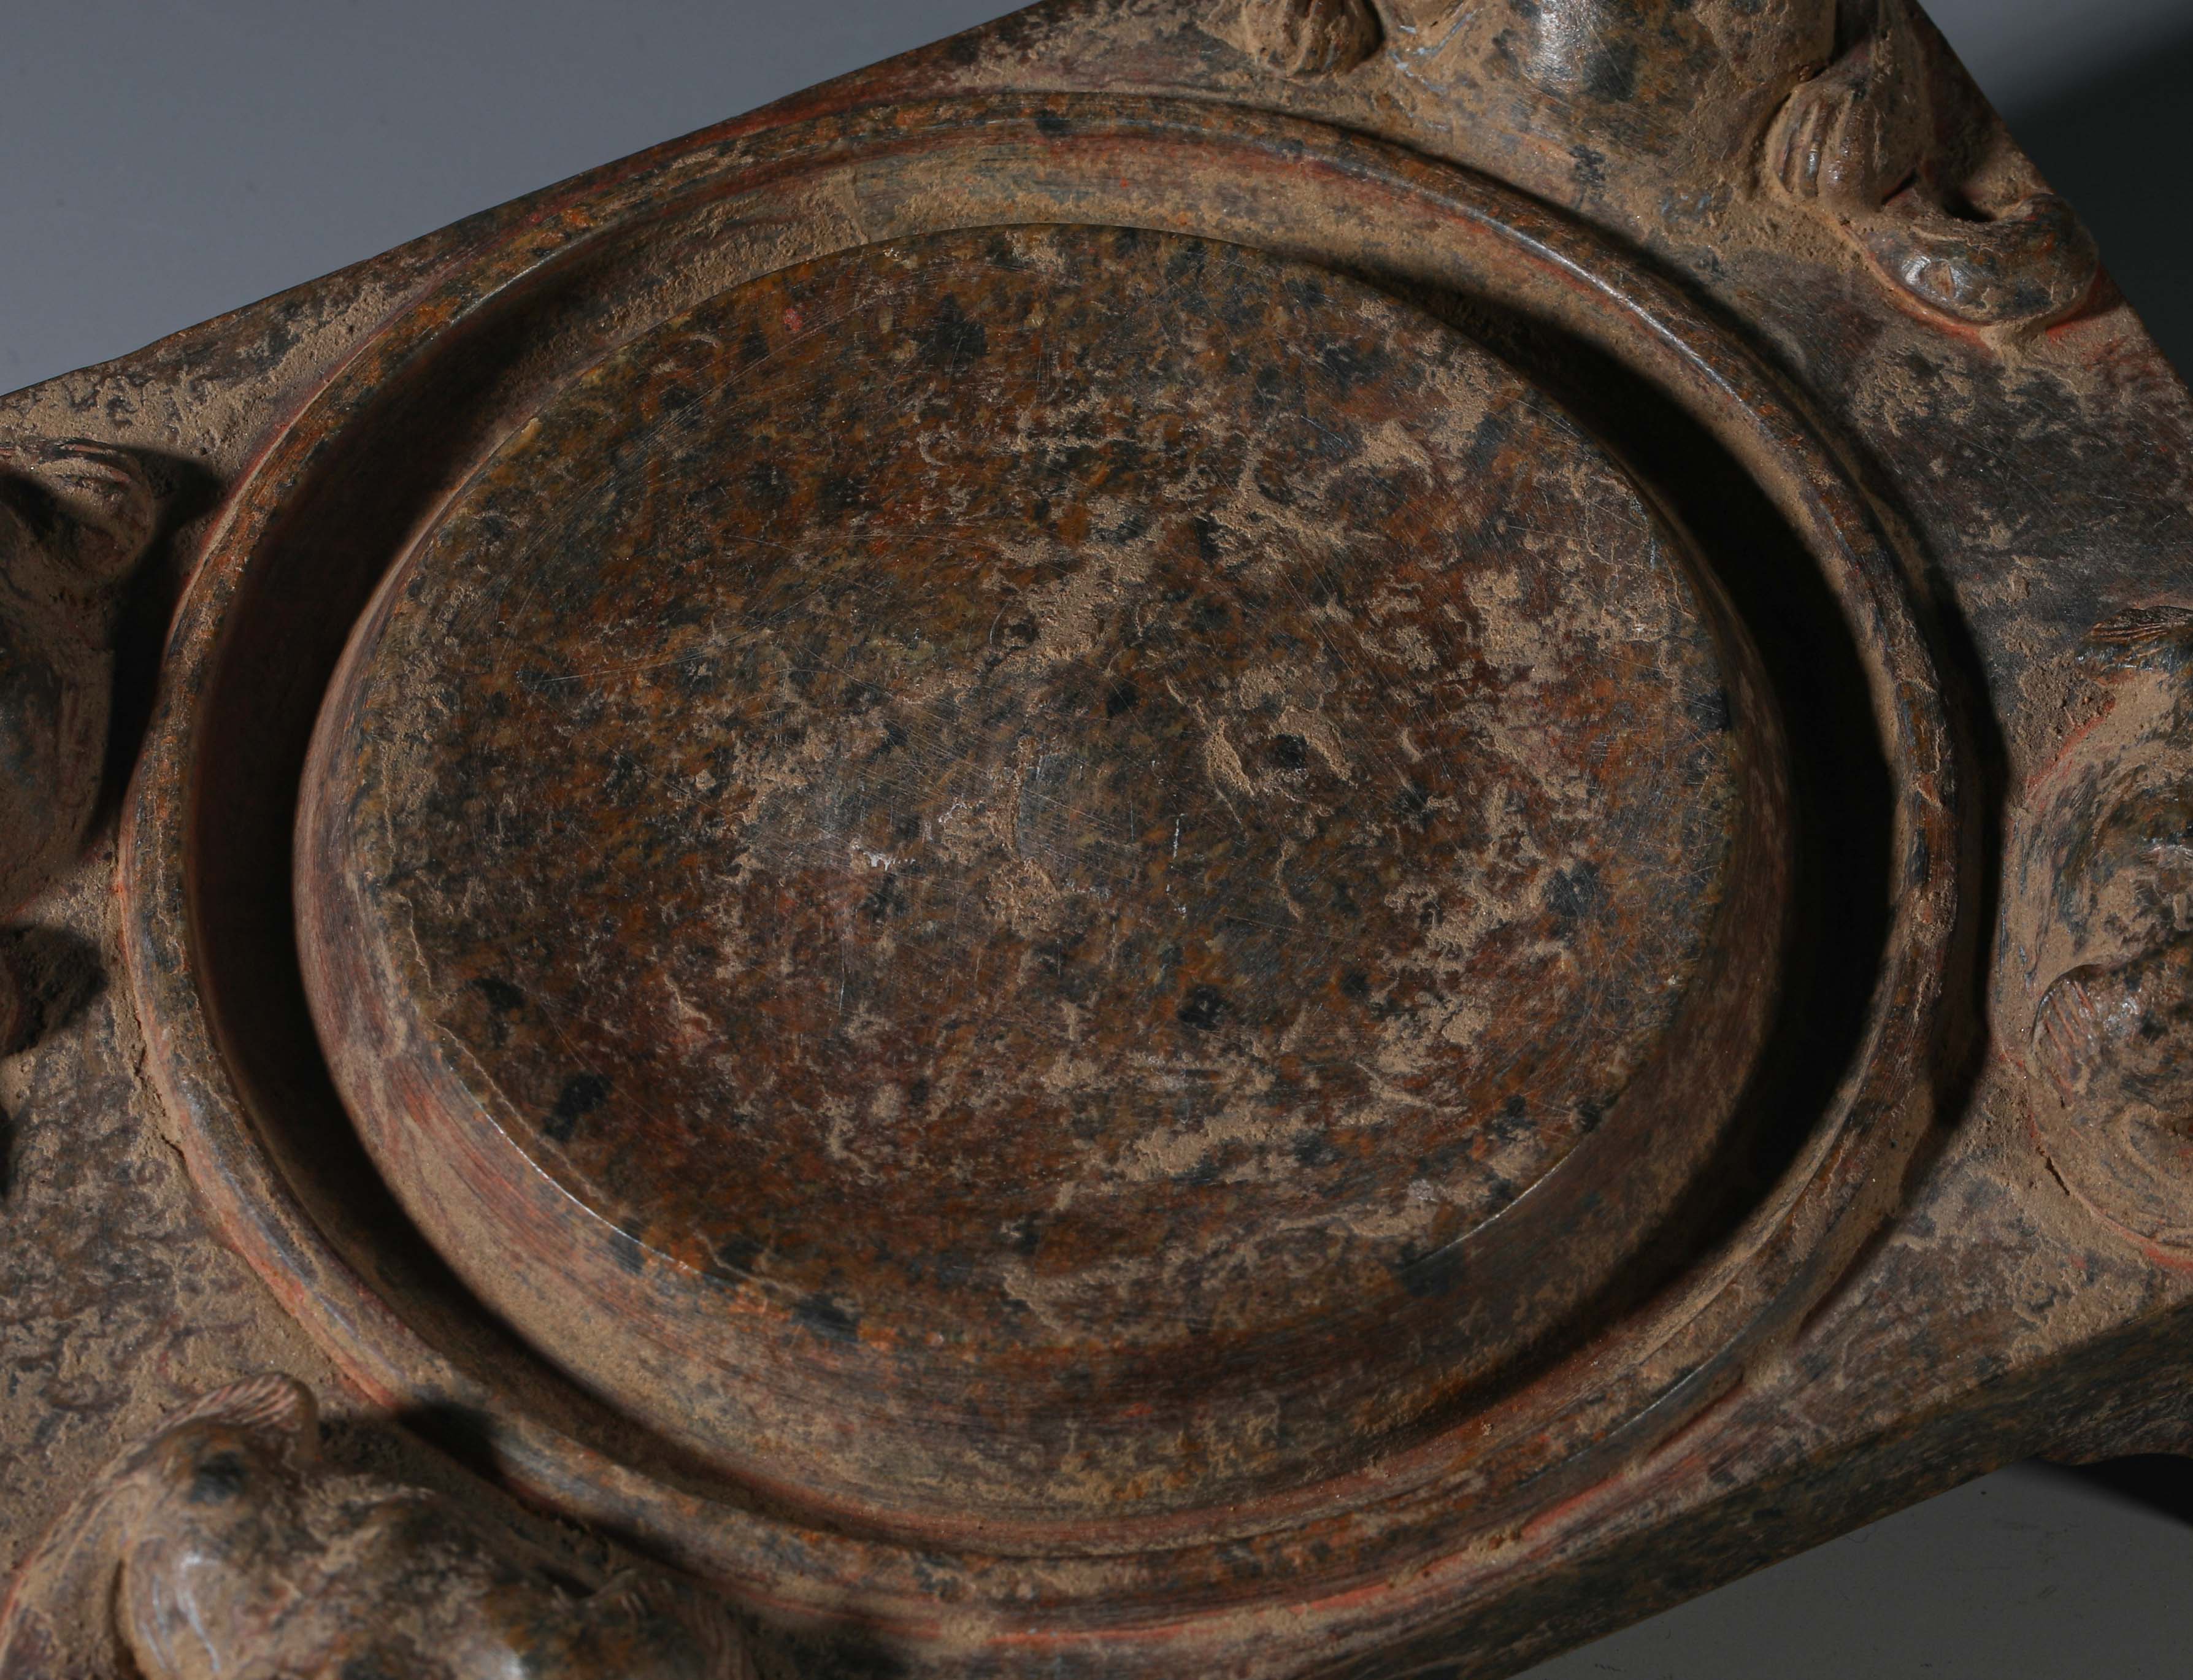 Copper incense burner  from the Han dynasty  - Image 8 of 11